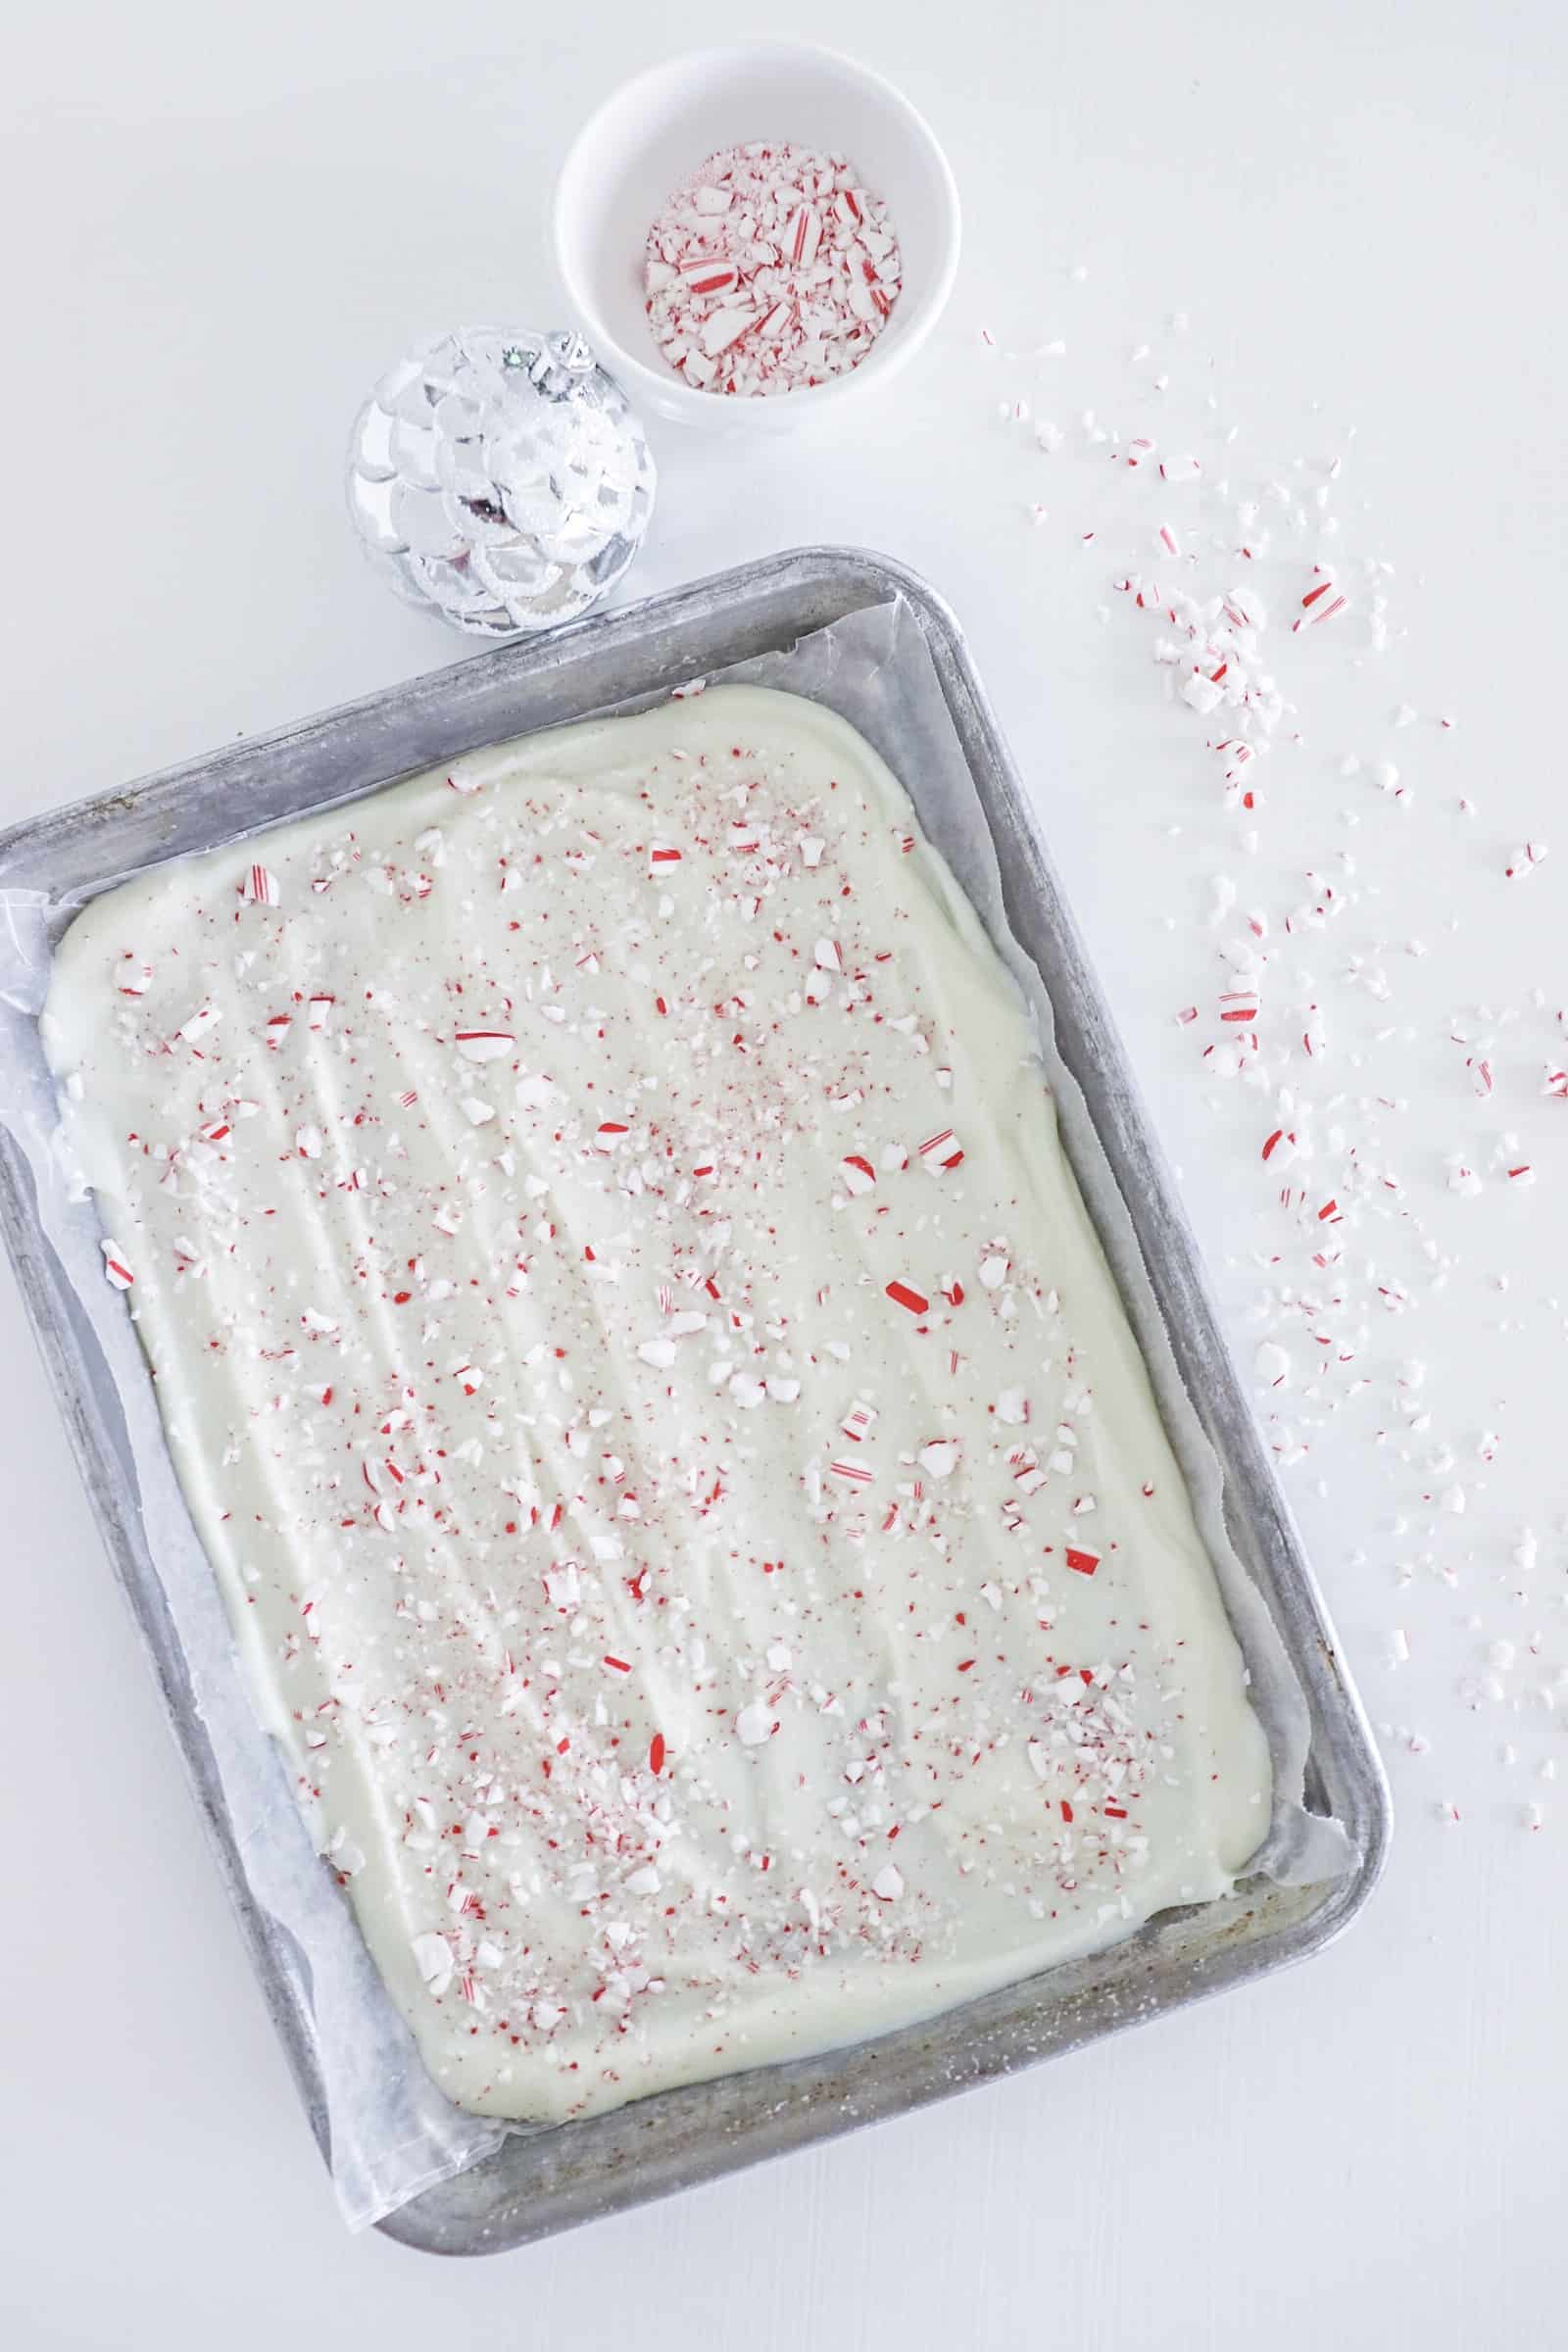 A baking tray topped with chilled white chocolate peppermint bark.